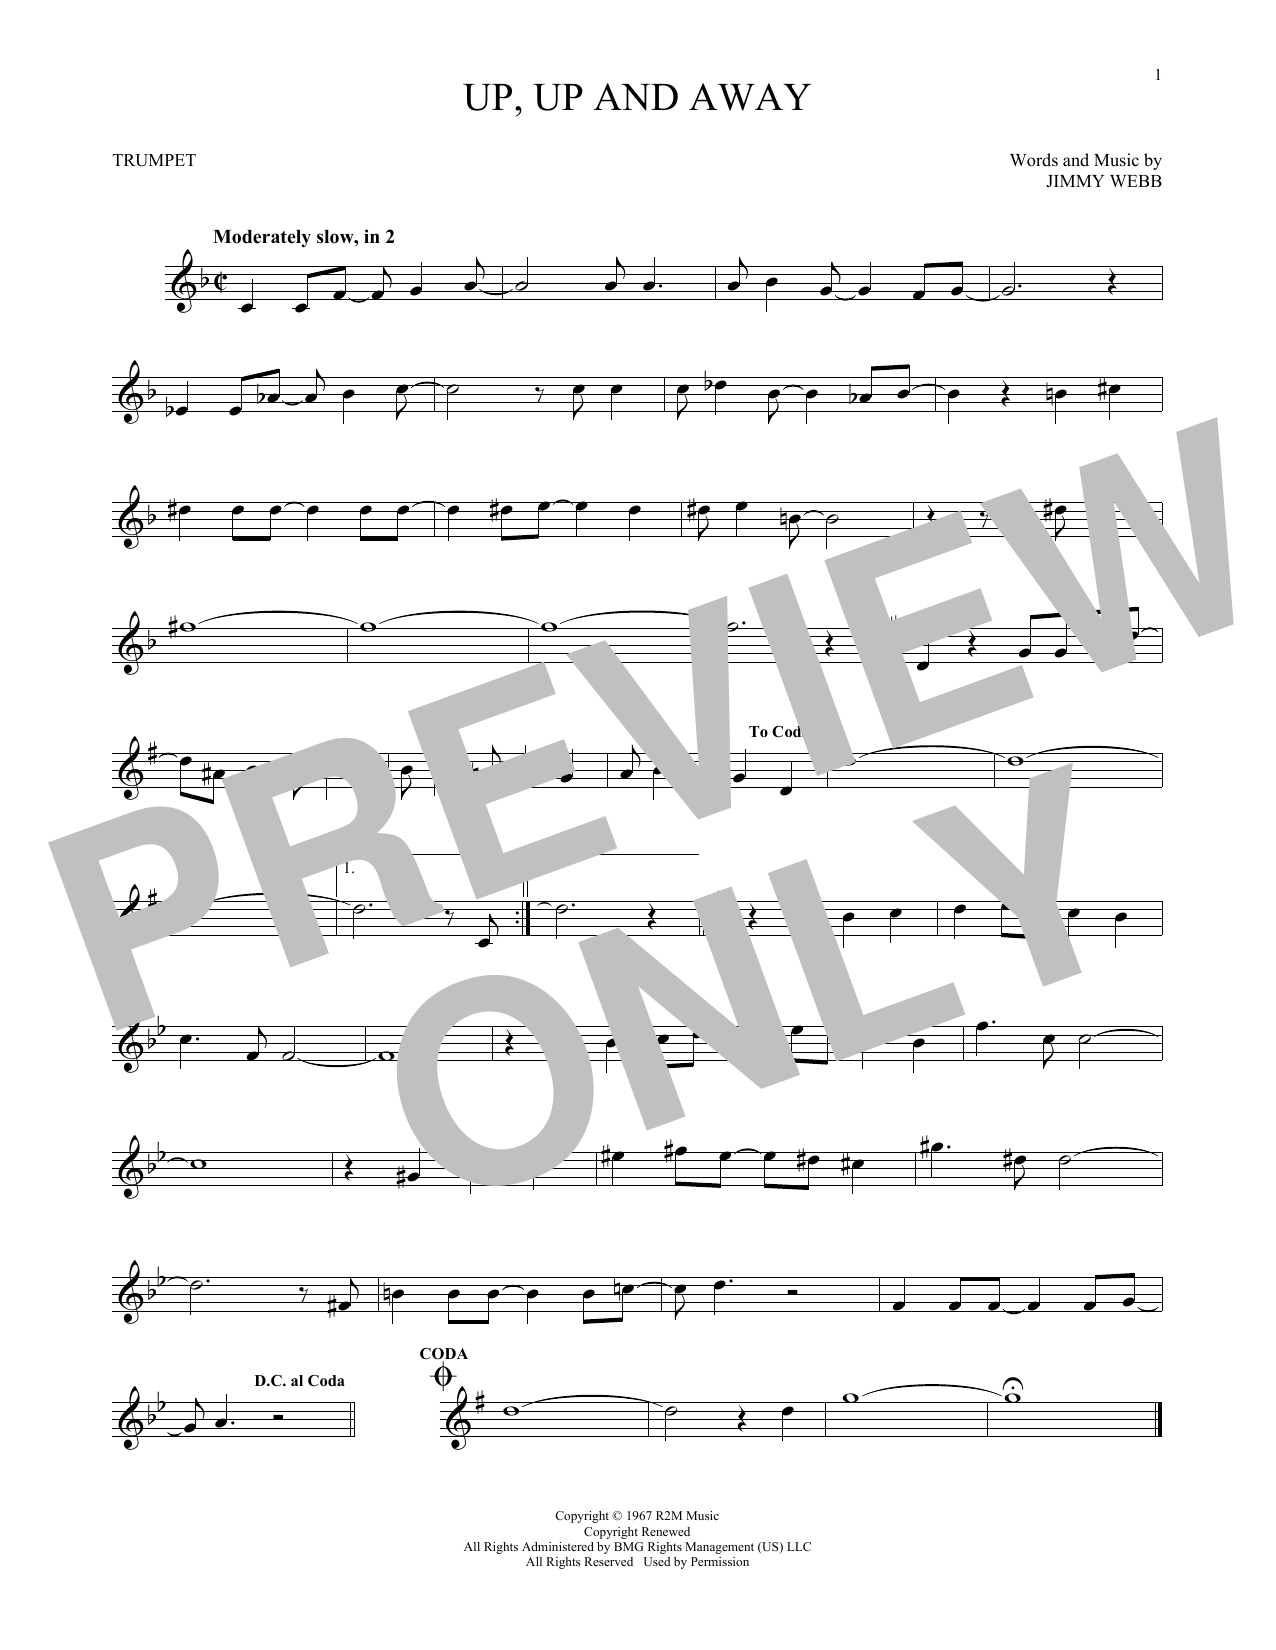 Download The Fifth Dimension Up, Up And Away Sheet Music